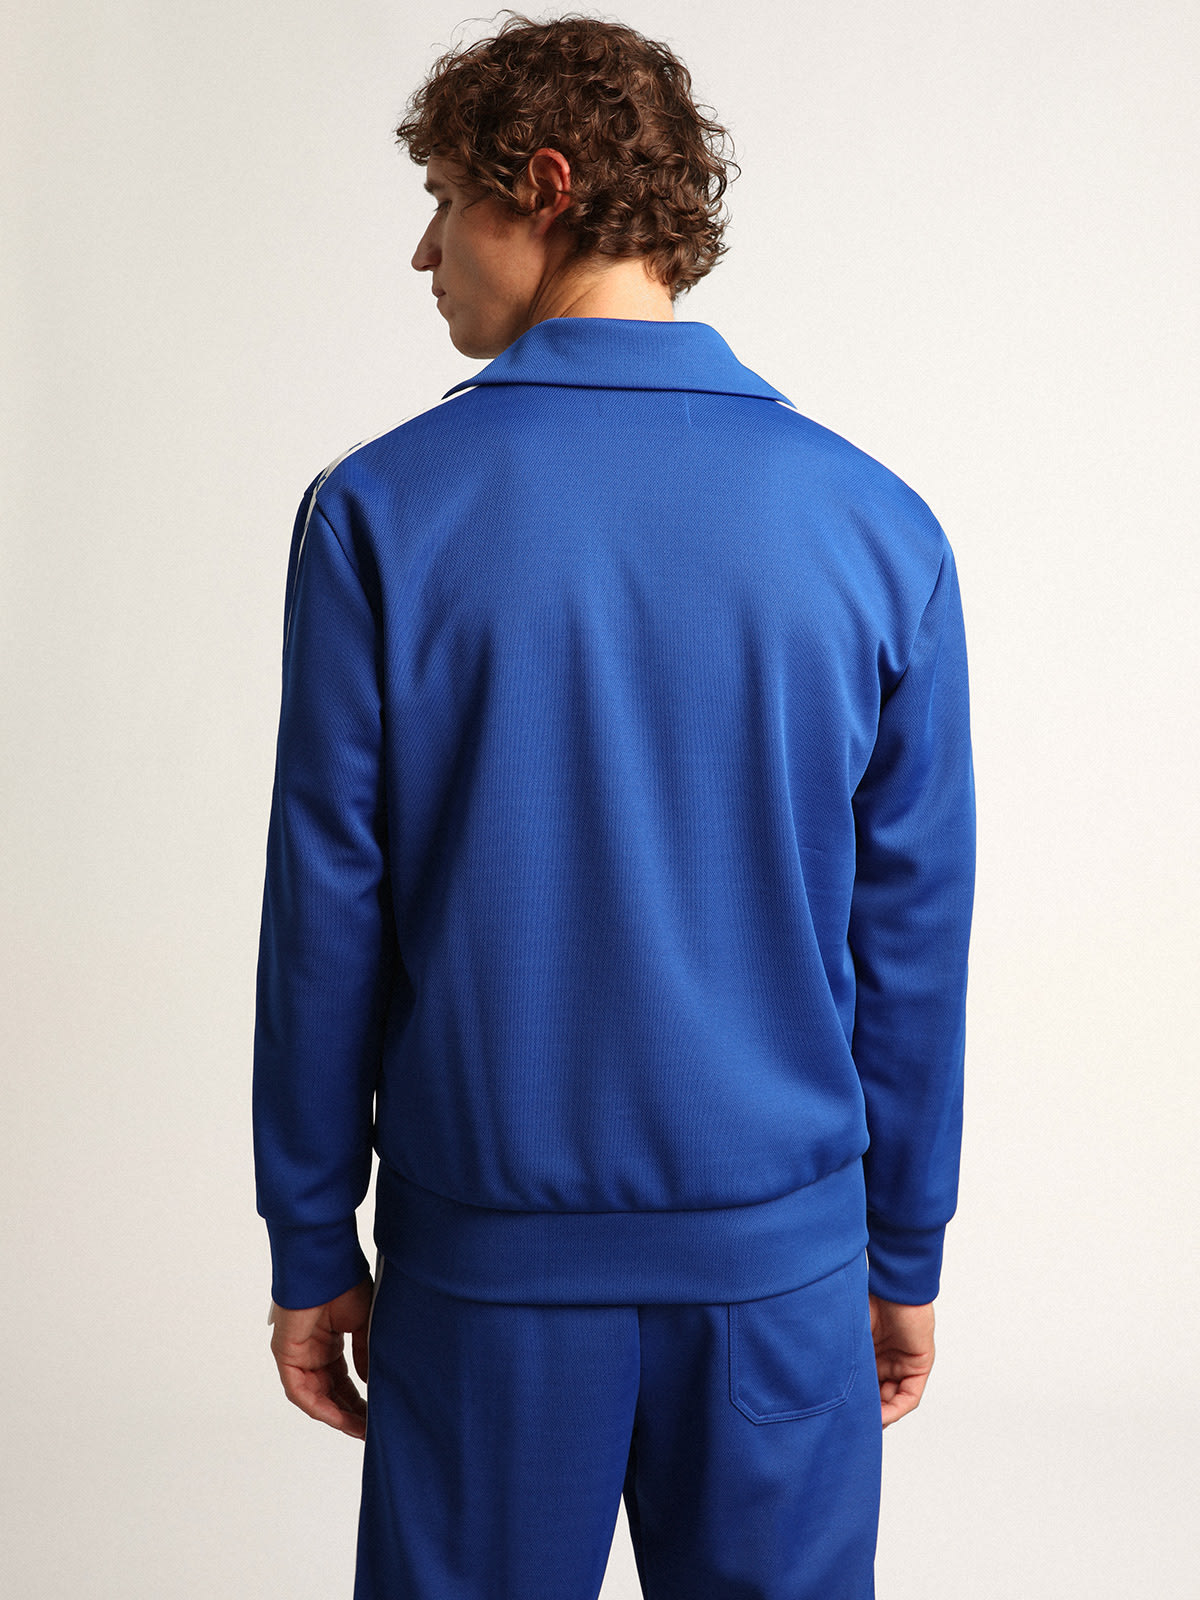 Golden Goose - Men’s blue zipped sweatshirt with white strip and contrasting stars in 